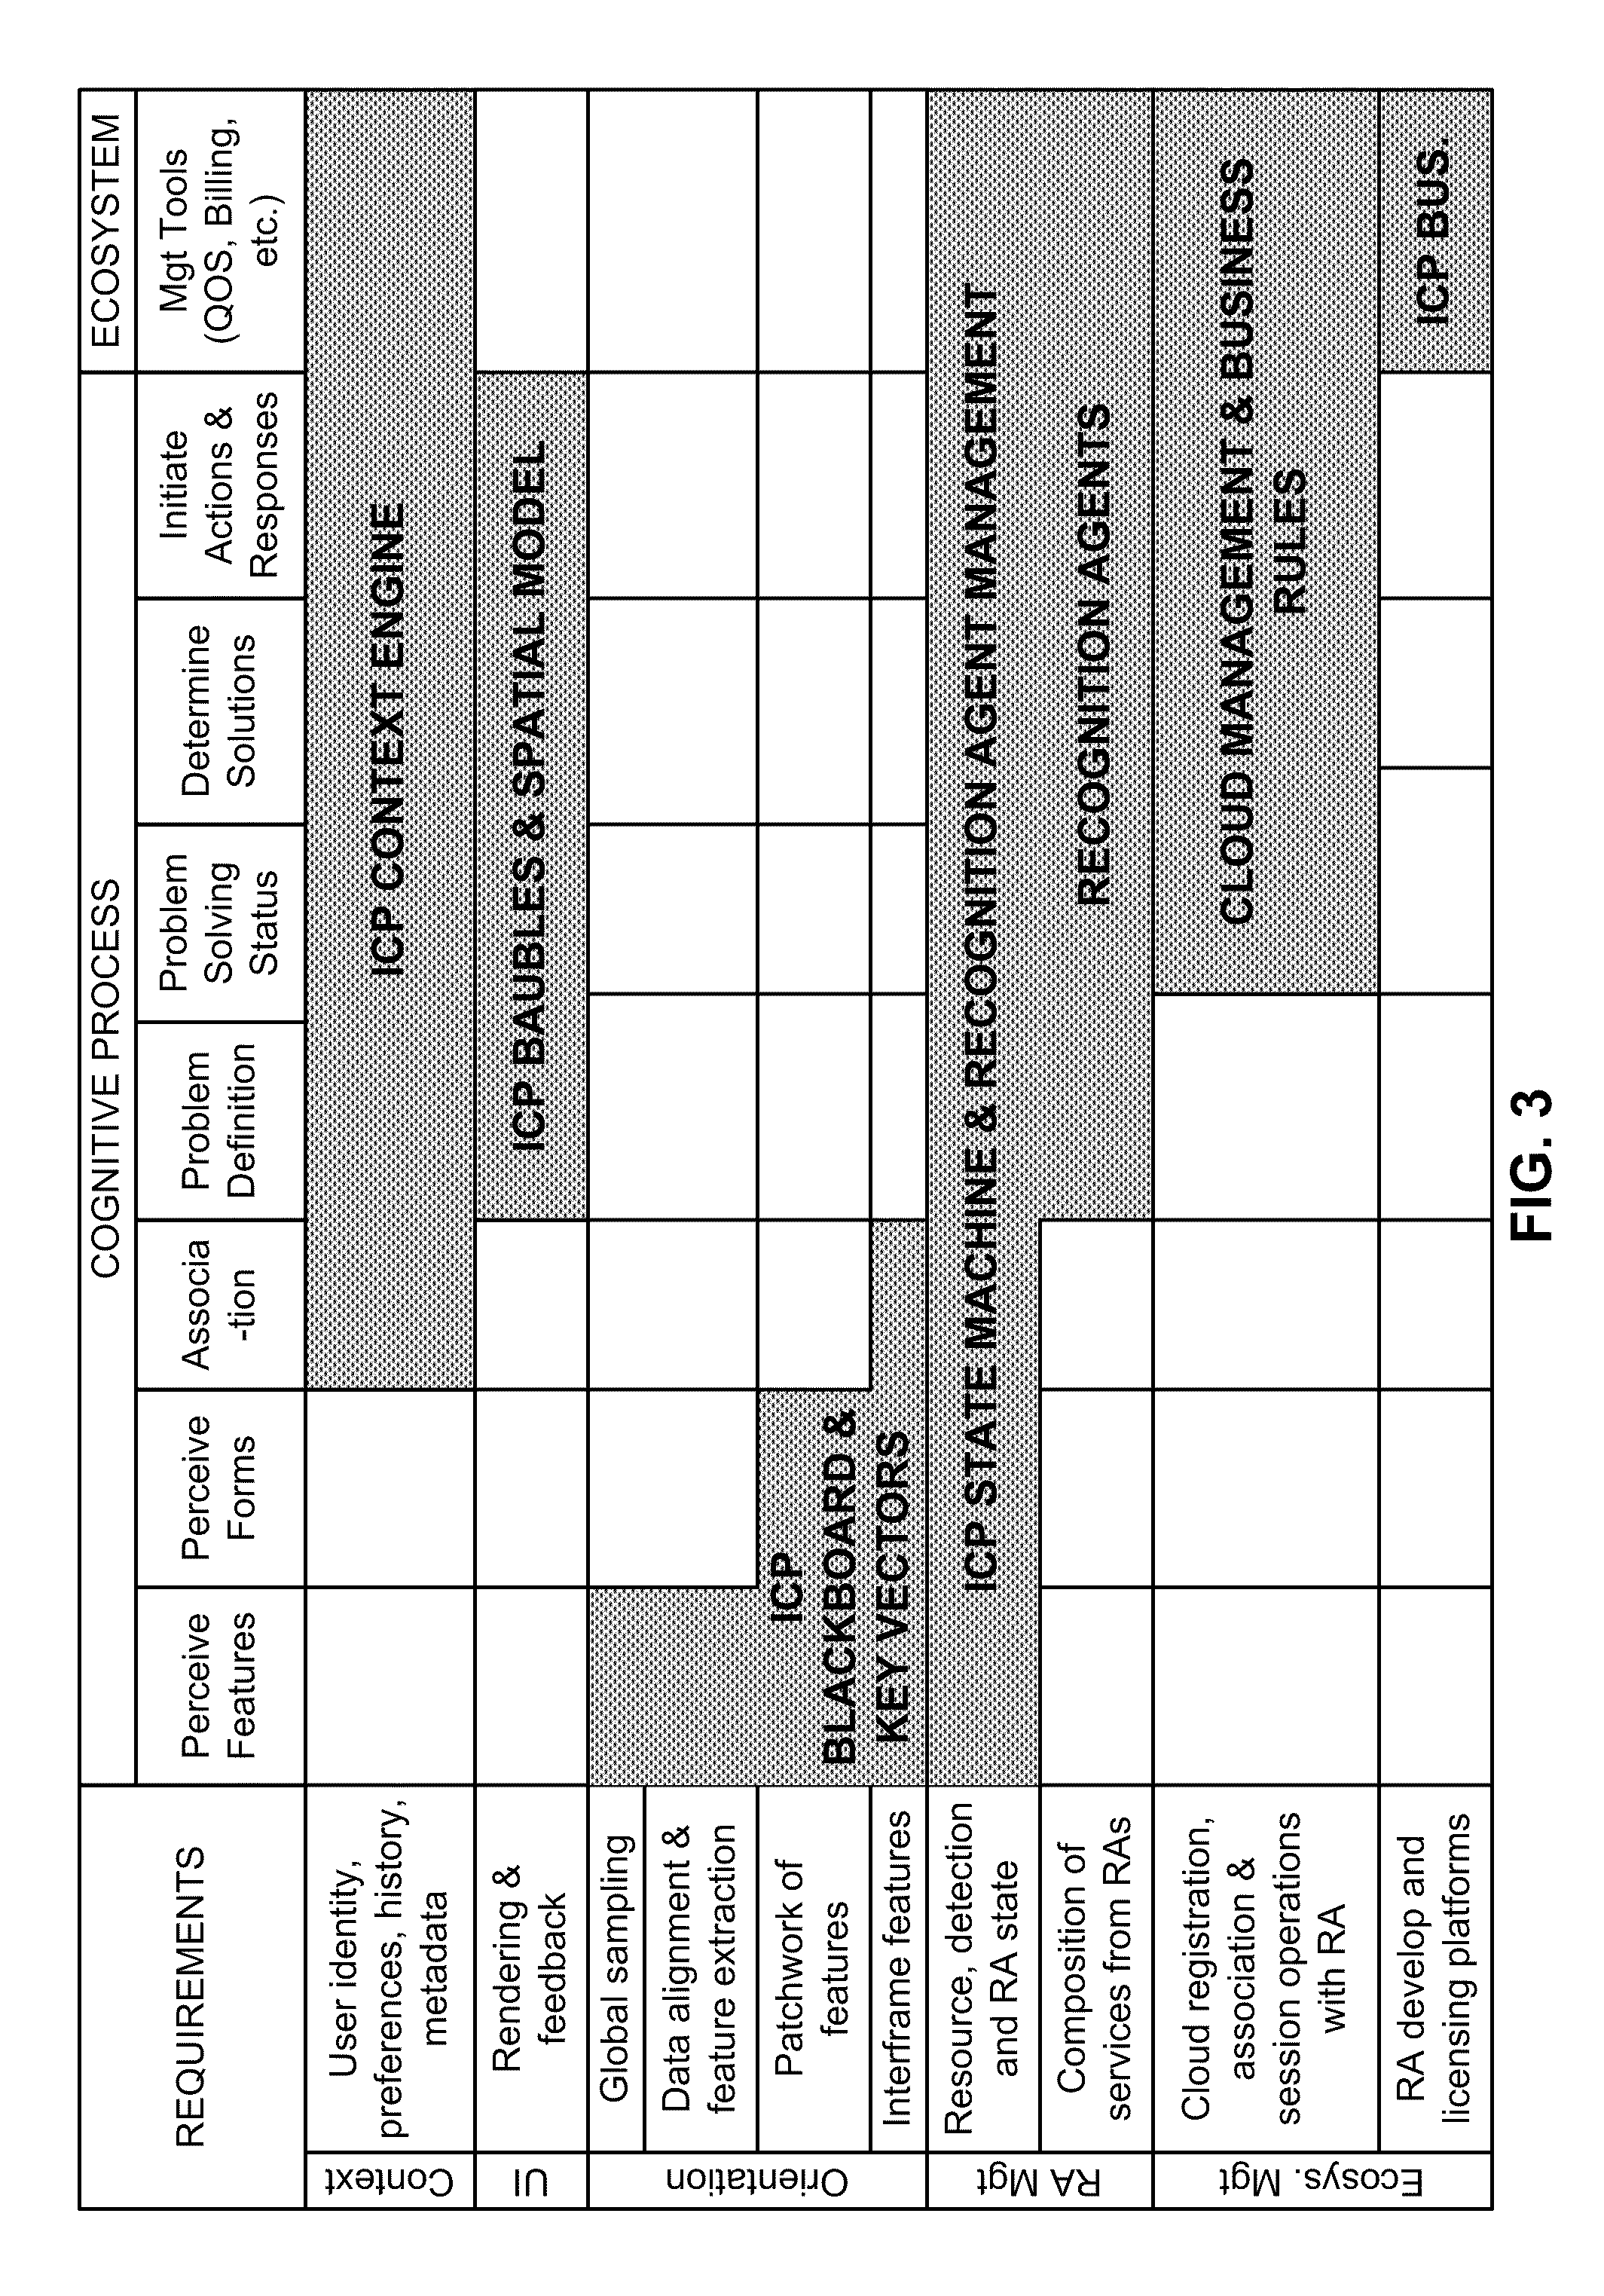 Methods and systems for determining image processing operations relevant to particular imagery